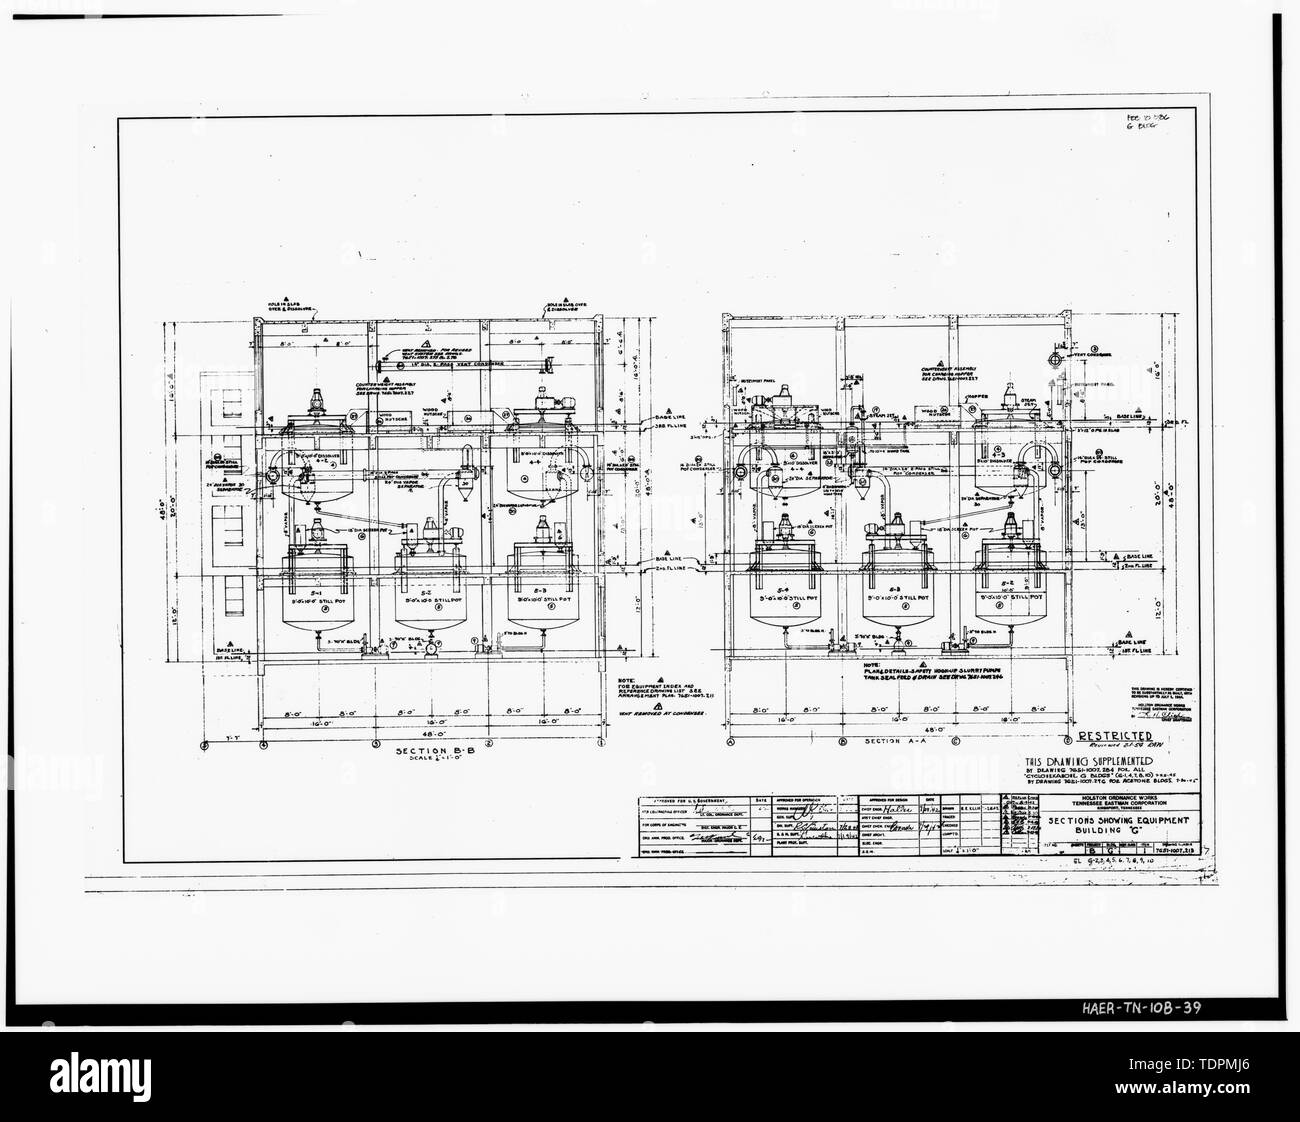 Photograph of a line drawing. 'SECTIONS SHOWING EQUIPMENT, BUILDING 'G'. Holston Ordnance Works, Tennessee Eastman Corporation. July 25, 1942. Delineator- E. E. Ellis. Drawing - 7651-1007-213. - Holston Army Ammunition Plant, RDX-and-Composition-B Manufacturing Line 9, Kingsport, Sullivan County, TN; Bachmann                              , Werner E; Tennessee Eastman Corporation; U.S. Department of the Army; National Defense Research Committee; Fraser-Brace Company; Charles T. Main Incorporated; U.S. Army Corps of Engineers; Holston Defense Corporation; Tompkins, Sally Kress, program manager;  Stock Photo